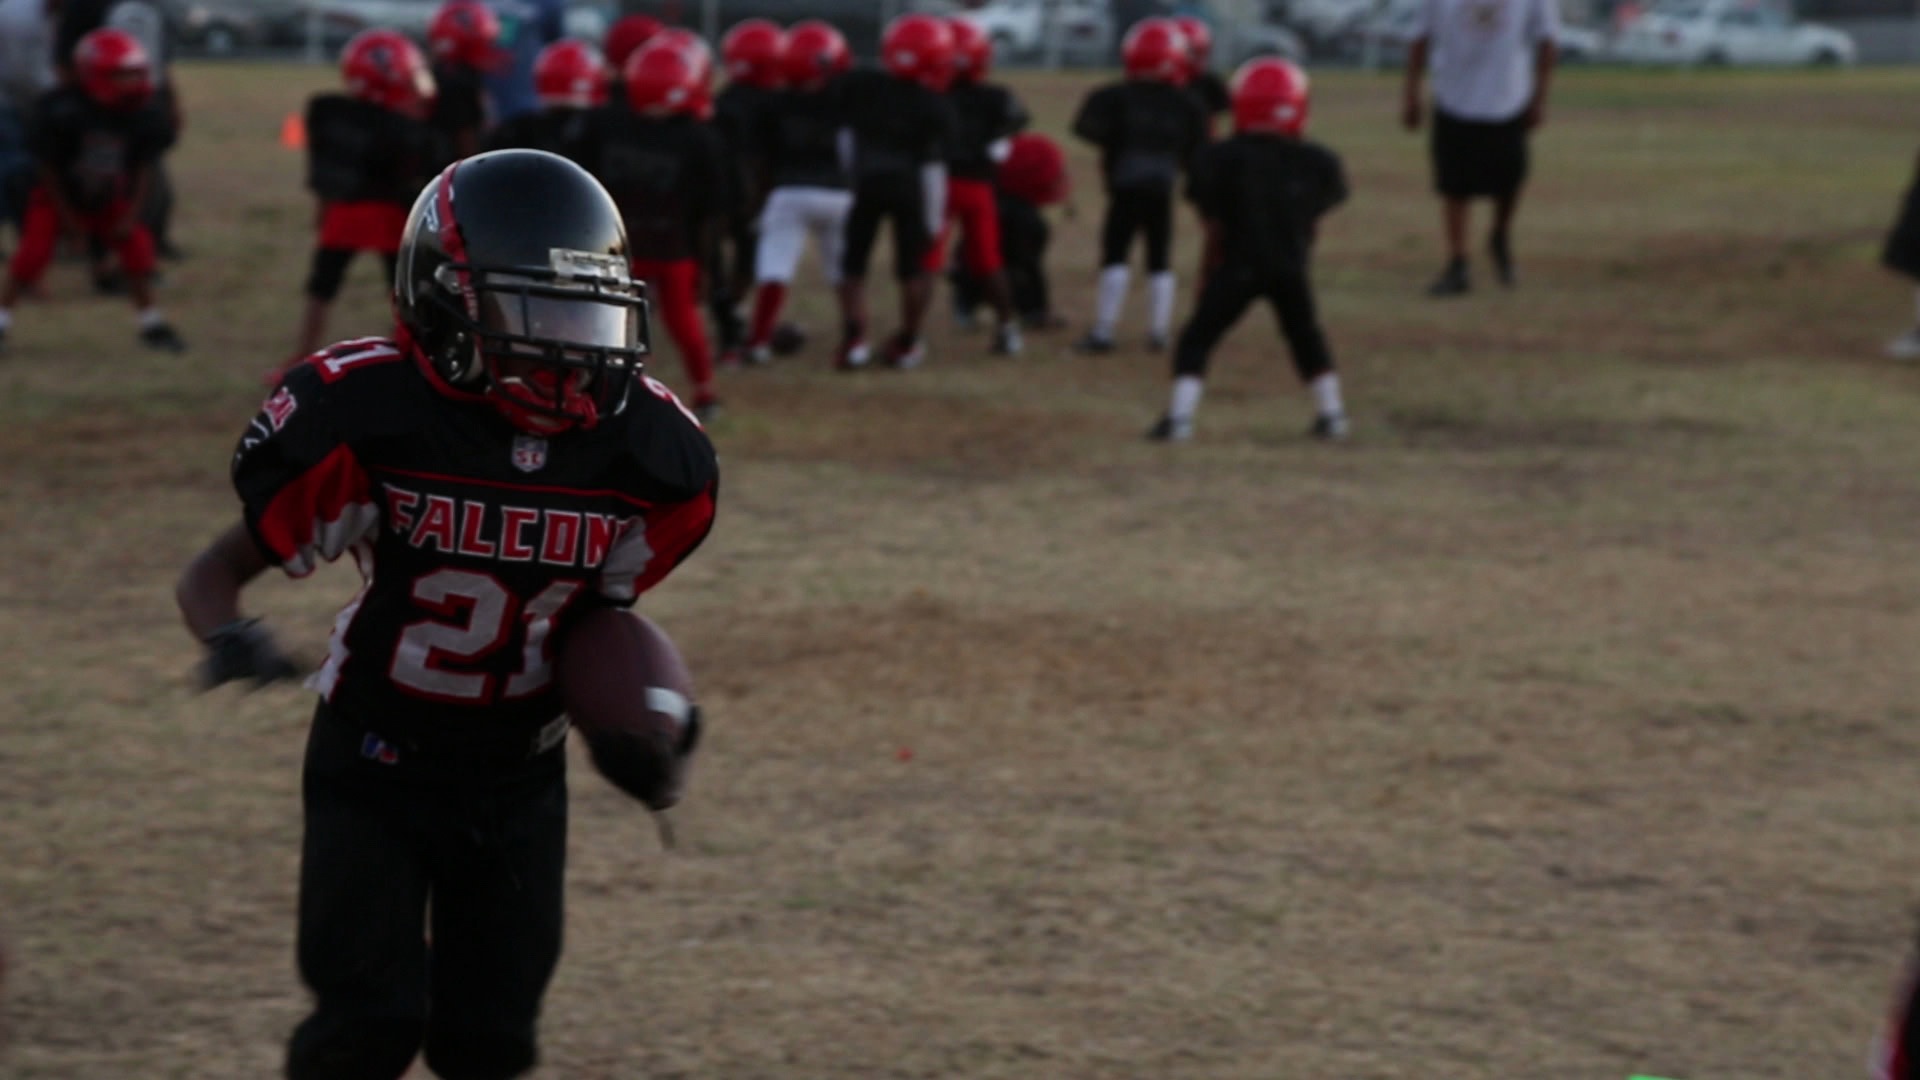  Southern California Falcons Youth Football Program practice 